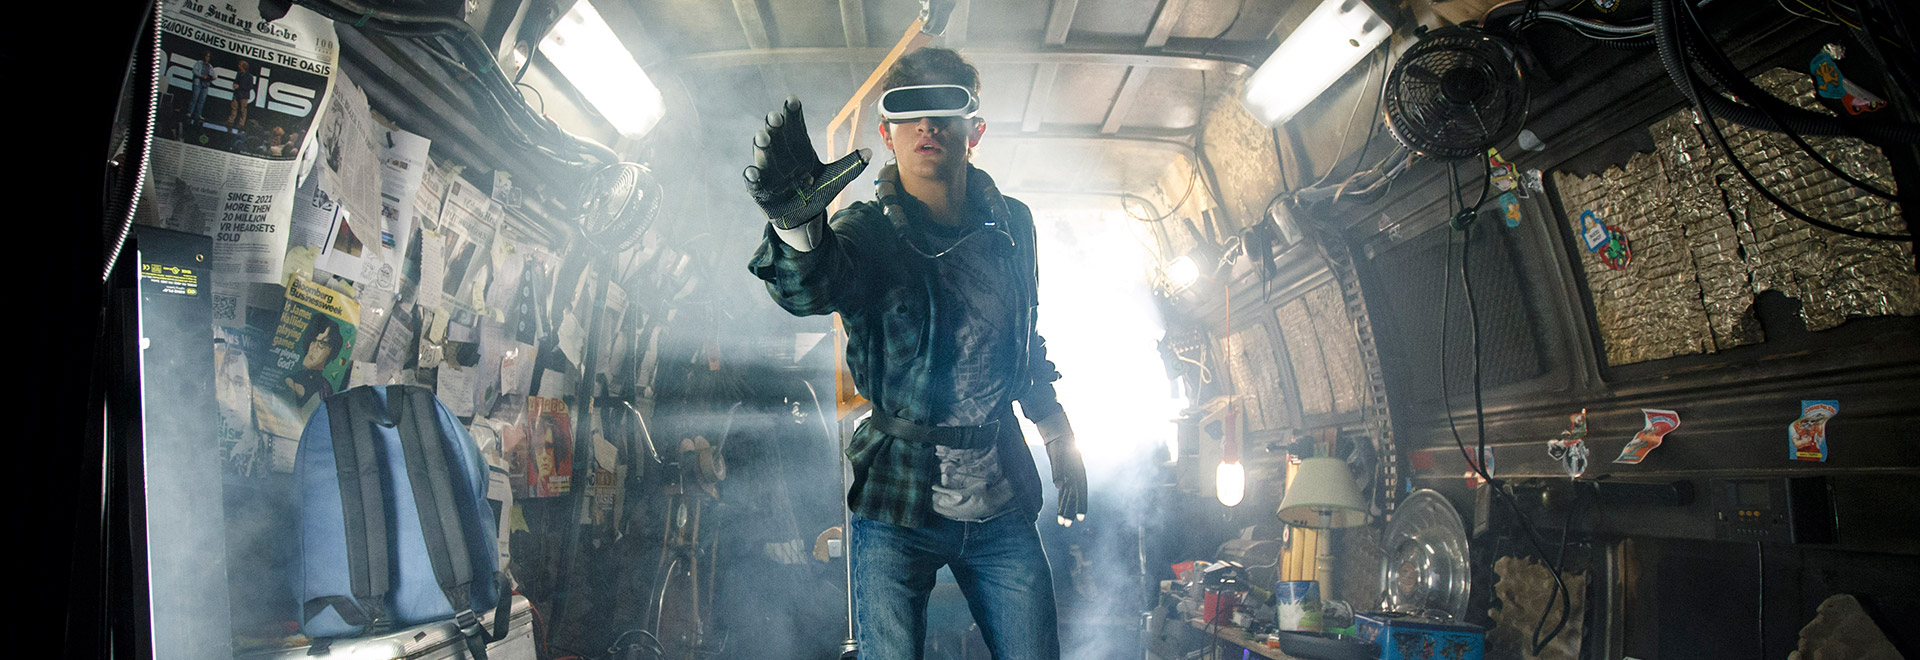 Ready Player One - A visually thrilling nostalgia trip worth taking